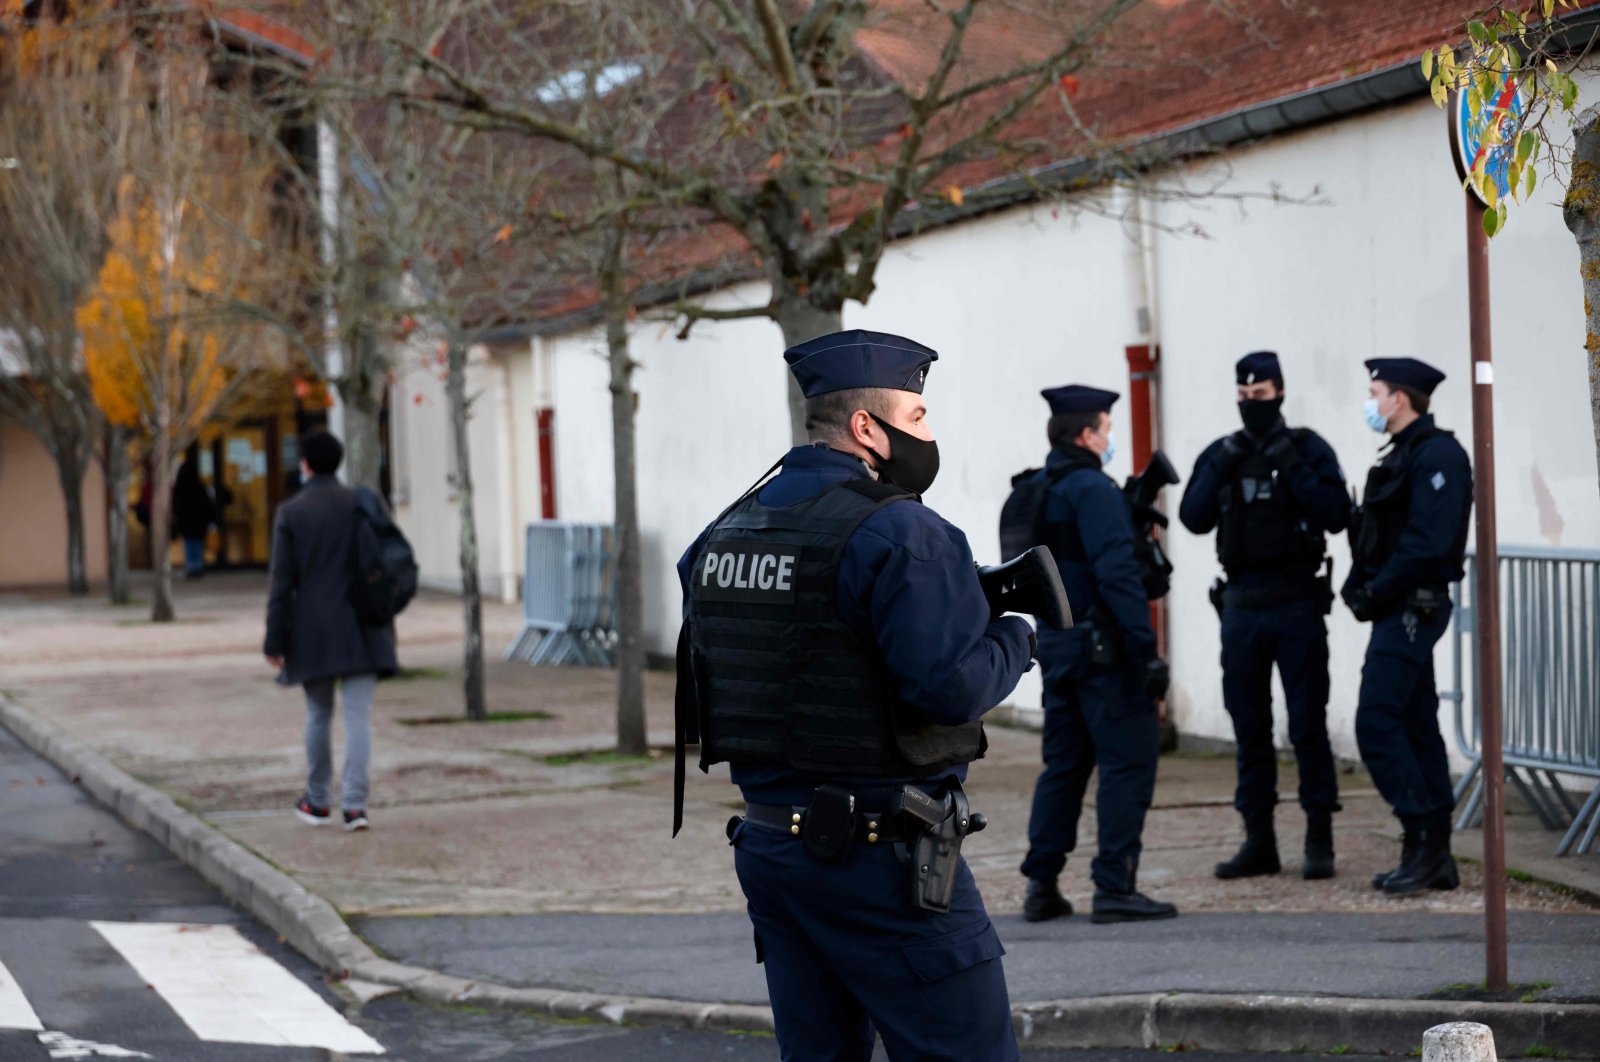 French CRS (Compagnies Republicaines de Securite) police officers stand near the entrance of Le Bois d'Aulne middle school in Conflans-Sainte-Honorine, 30 kilometers northwest of Paris, on Nov. 3, 2020. (AFP)